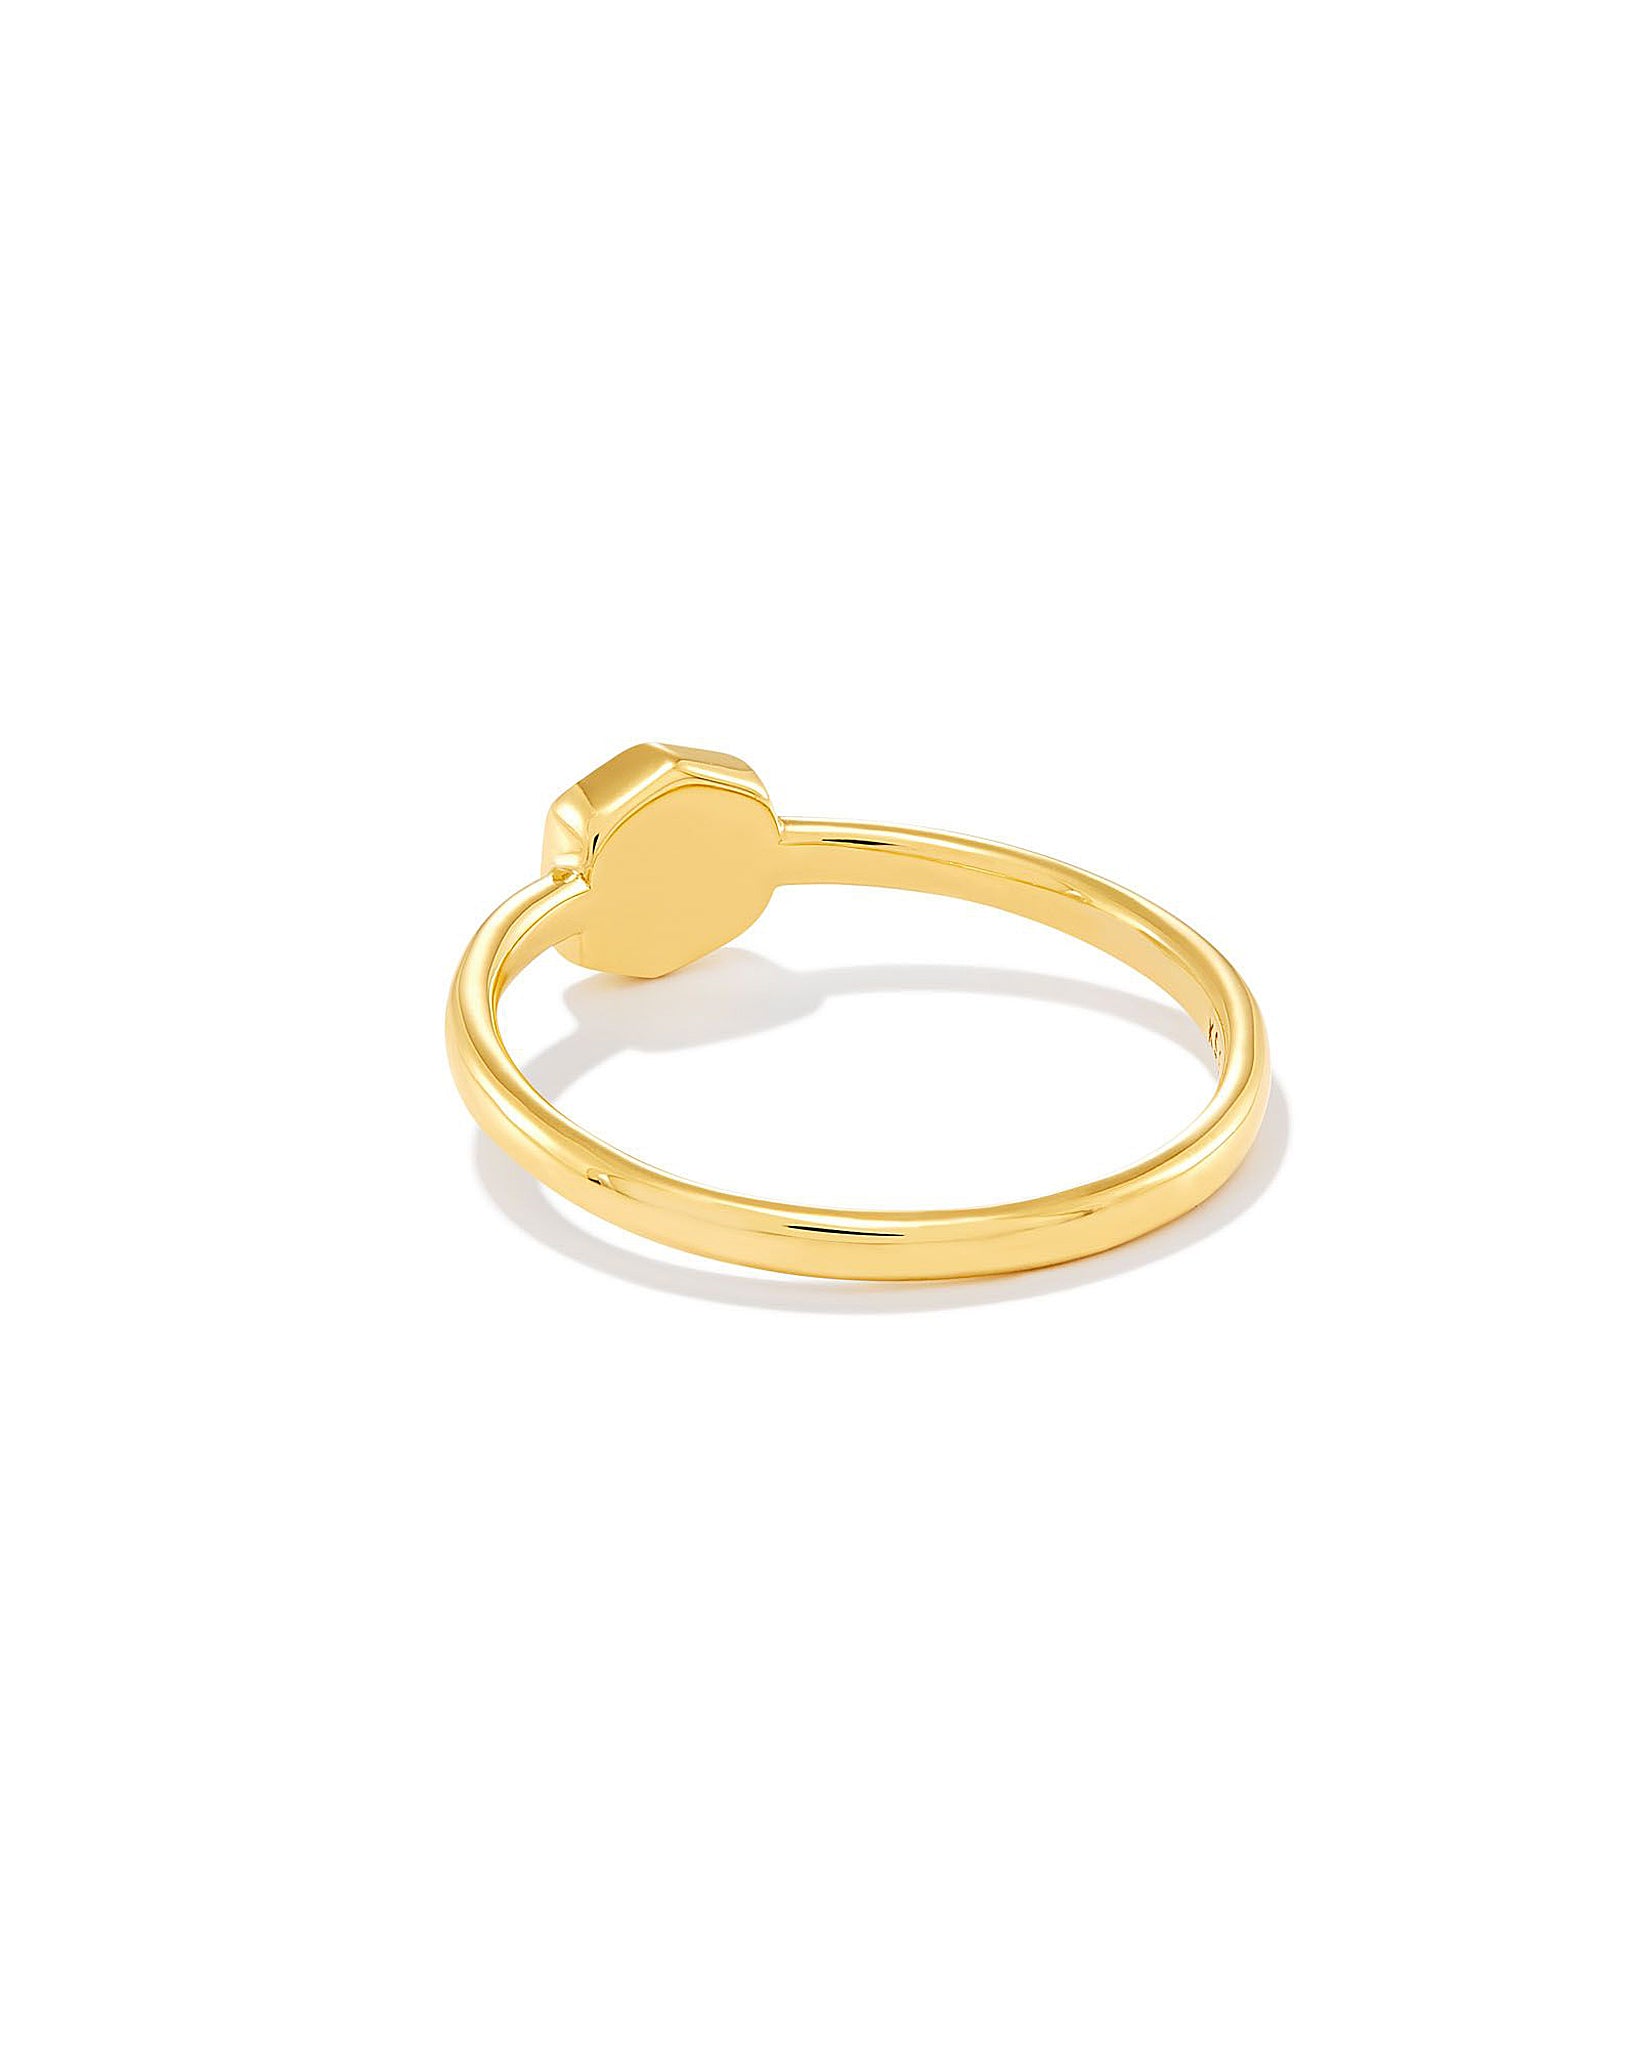 Kendra Scott Davie Band Ring in Clear Rock Crystal and 18k Gold Vermeil Size 6